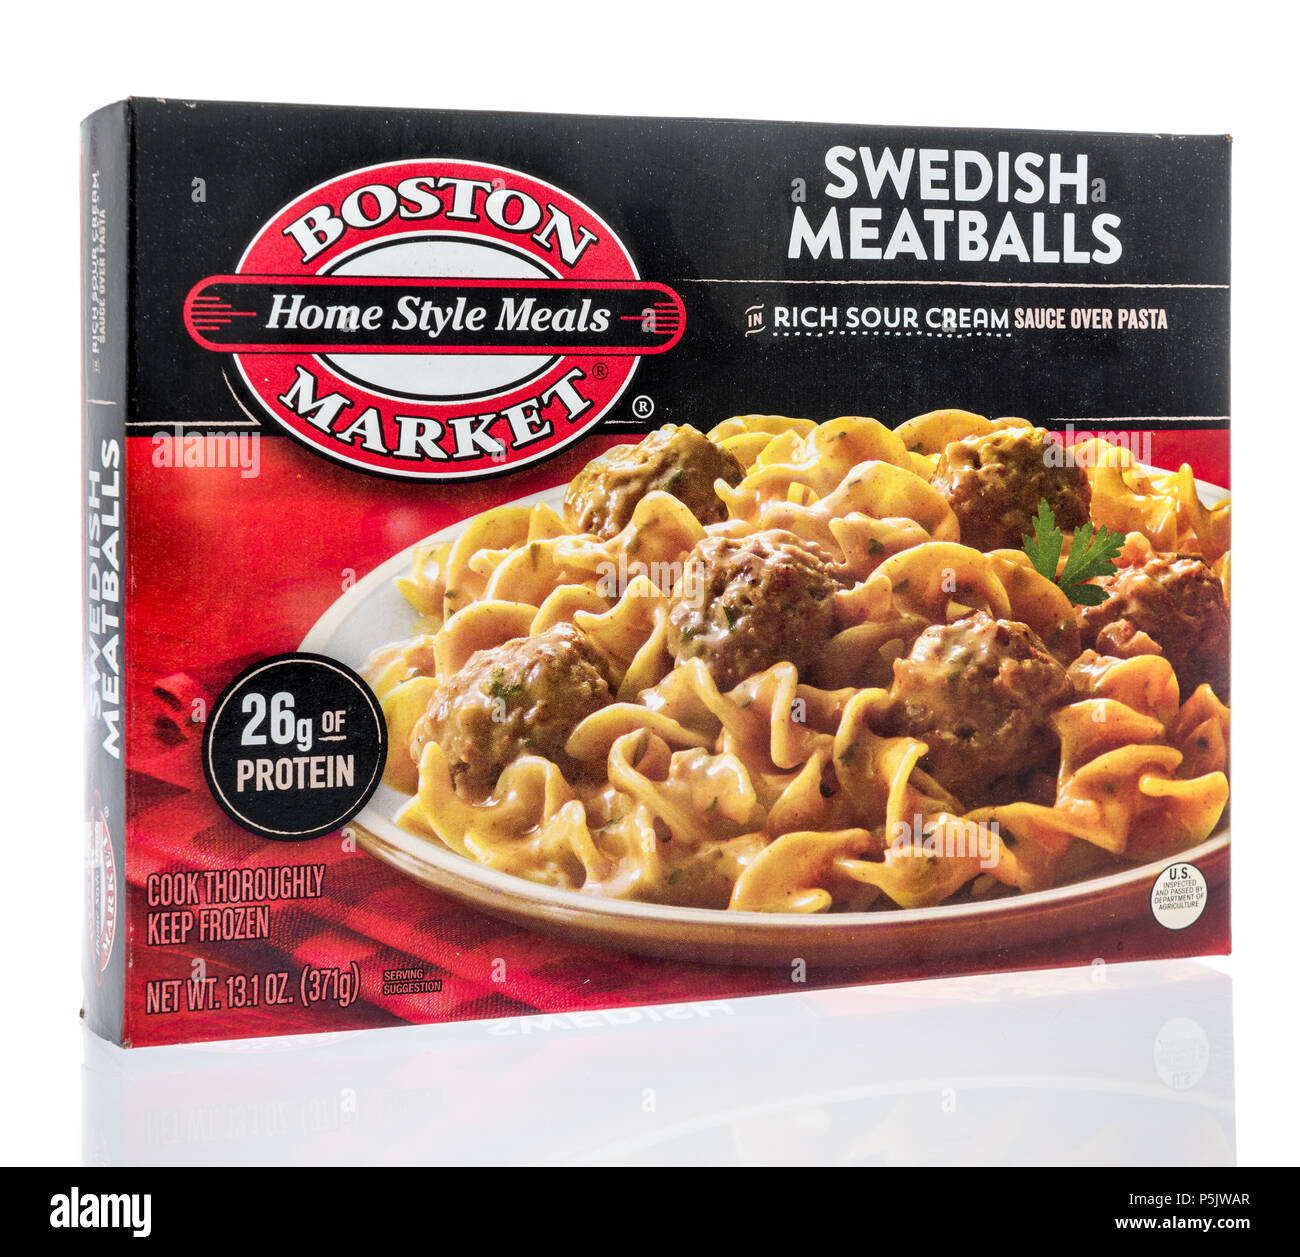 Winneconne, WI - 17 June 2018: A box of Boston Market homestyle meals in Swedish meatballs on an isolated background. Stock Photo